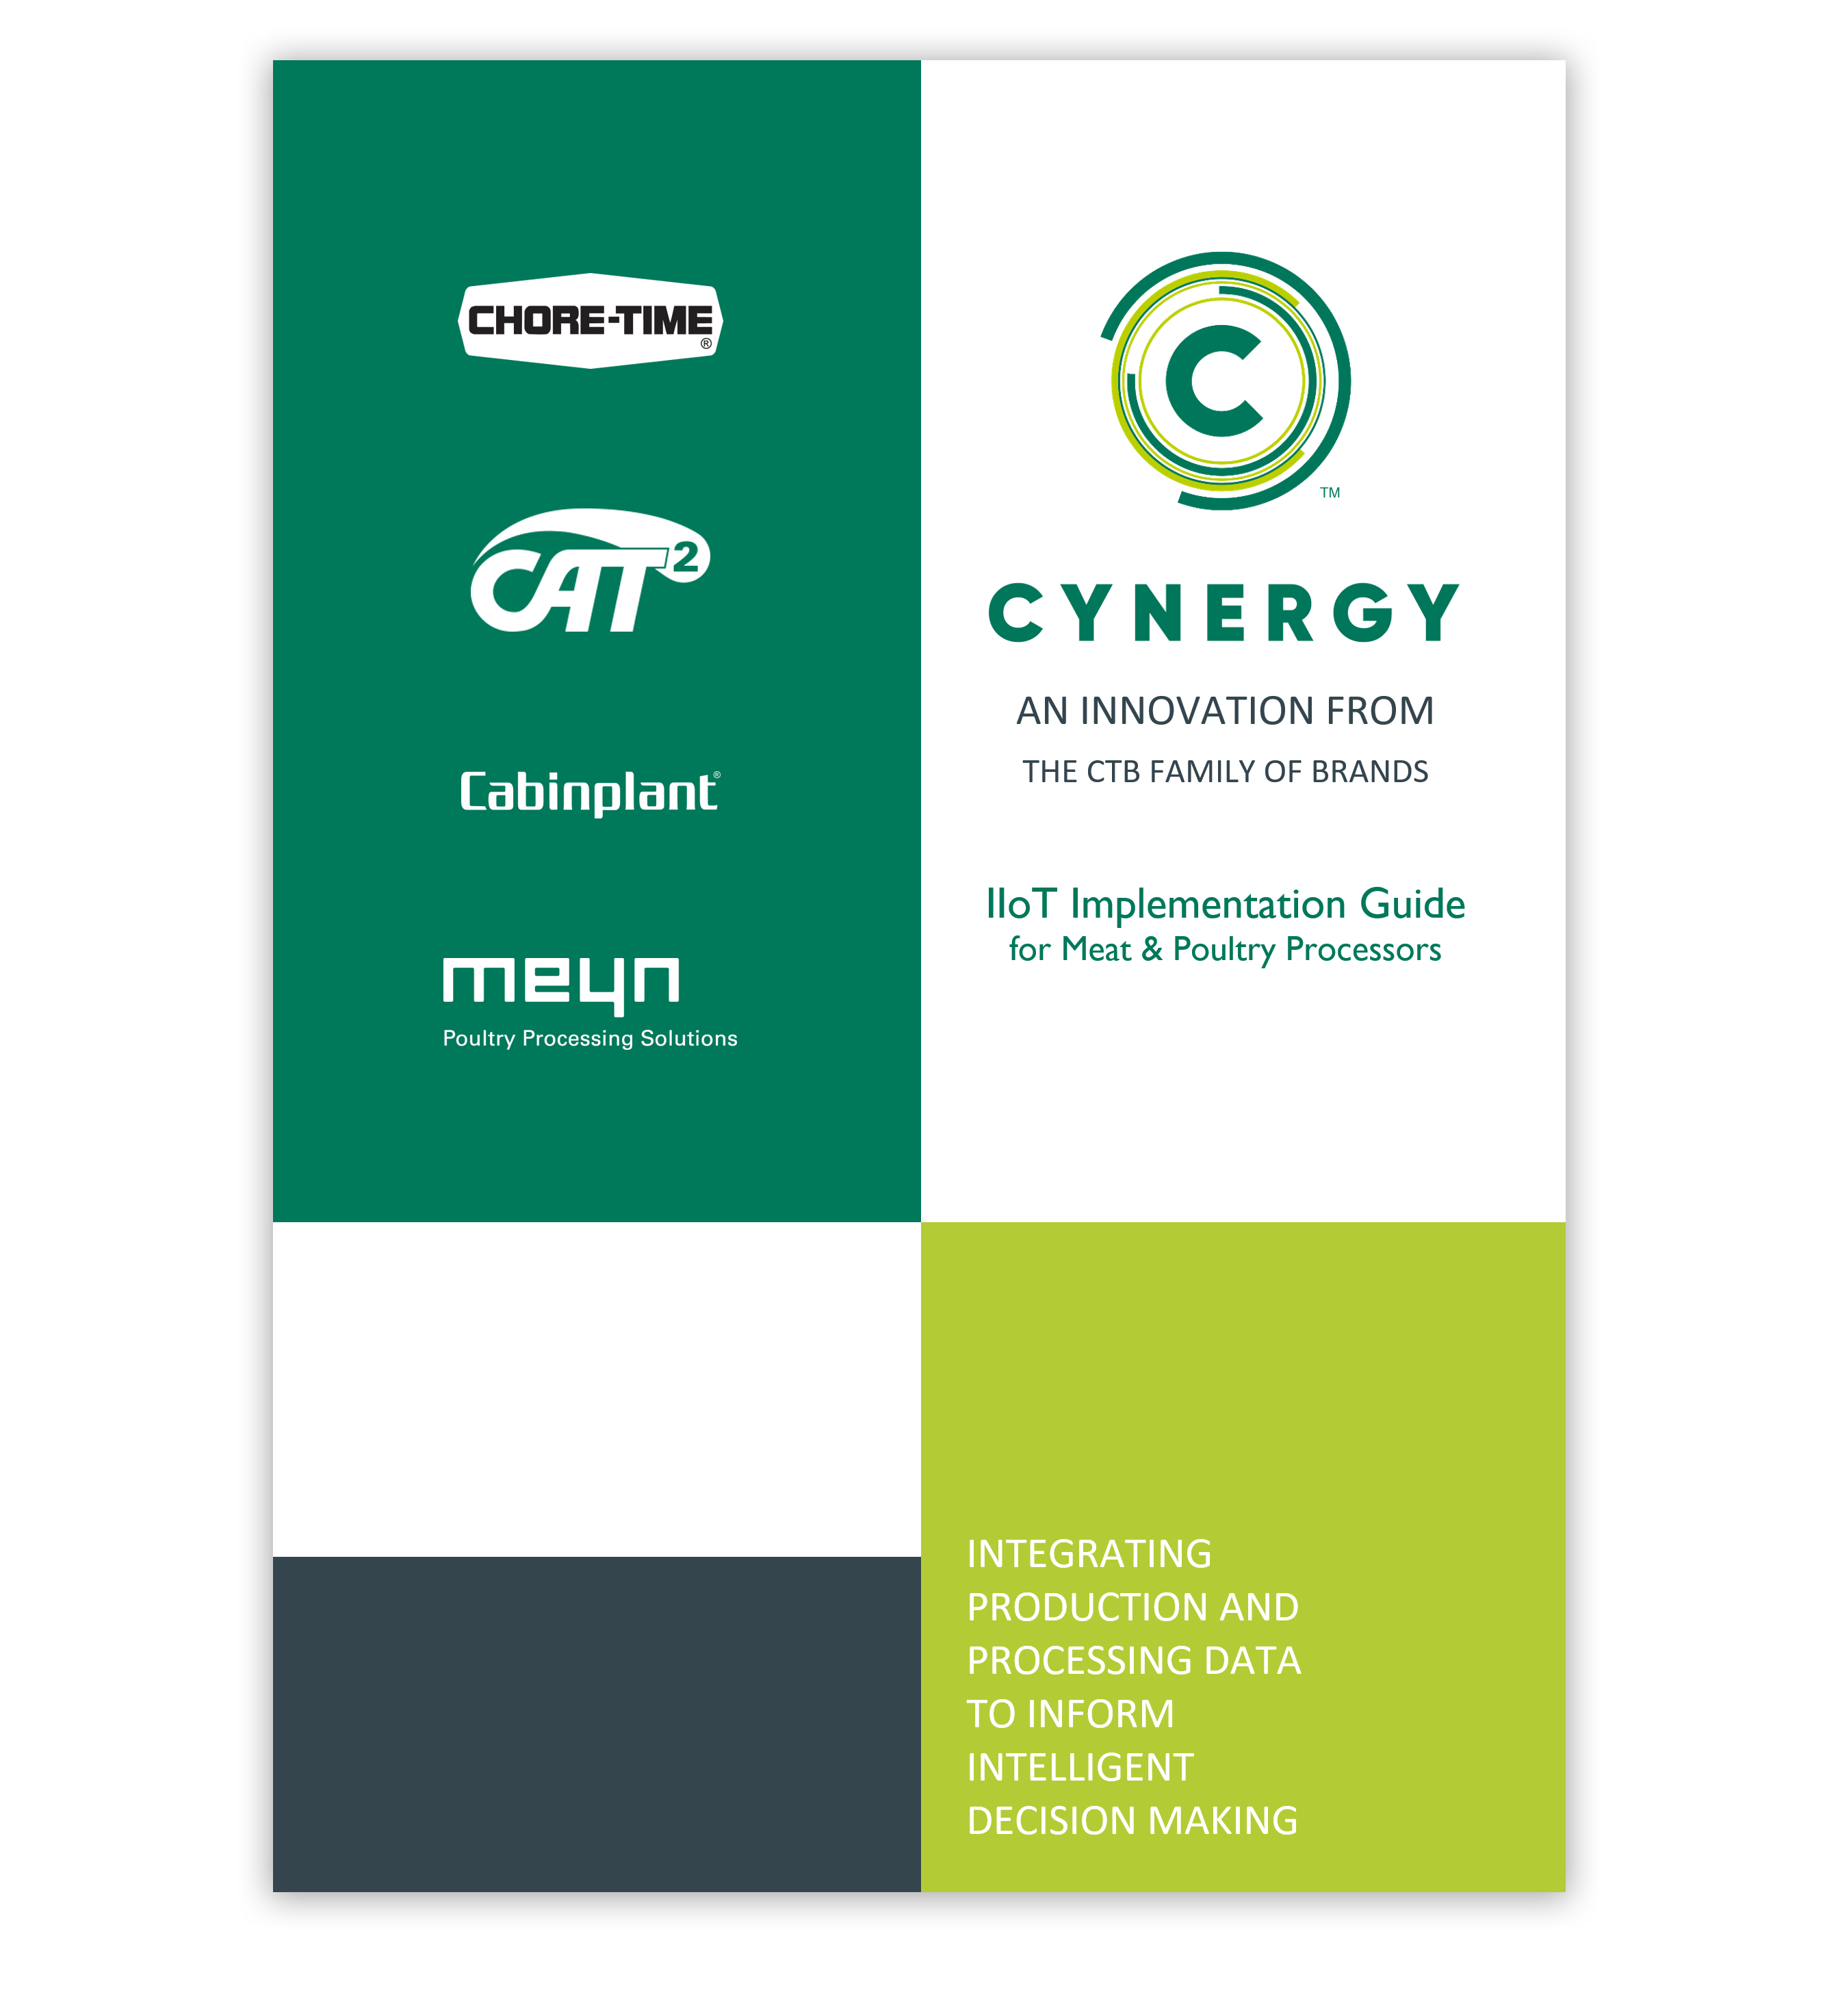 CYNERGY-IIoT-Implementation-Guide-for-Meat-&-Poultry-Processors